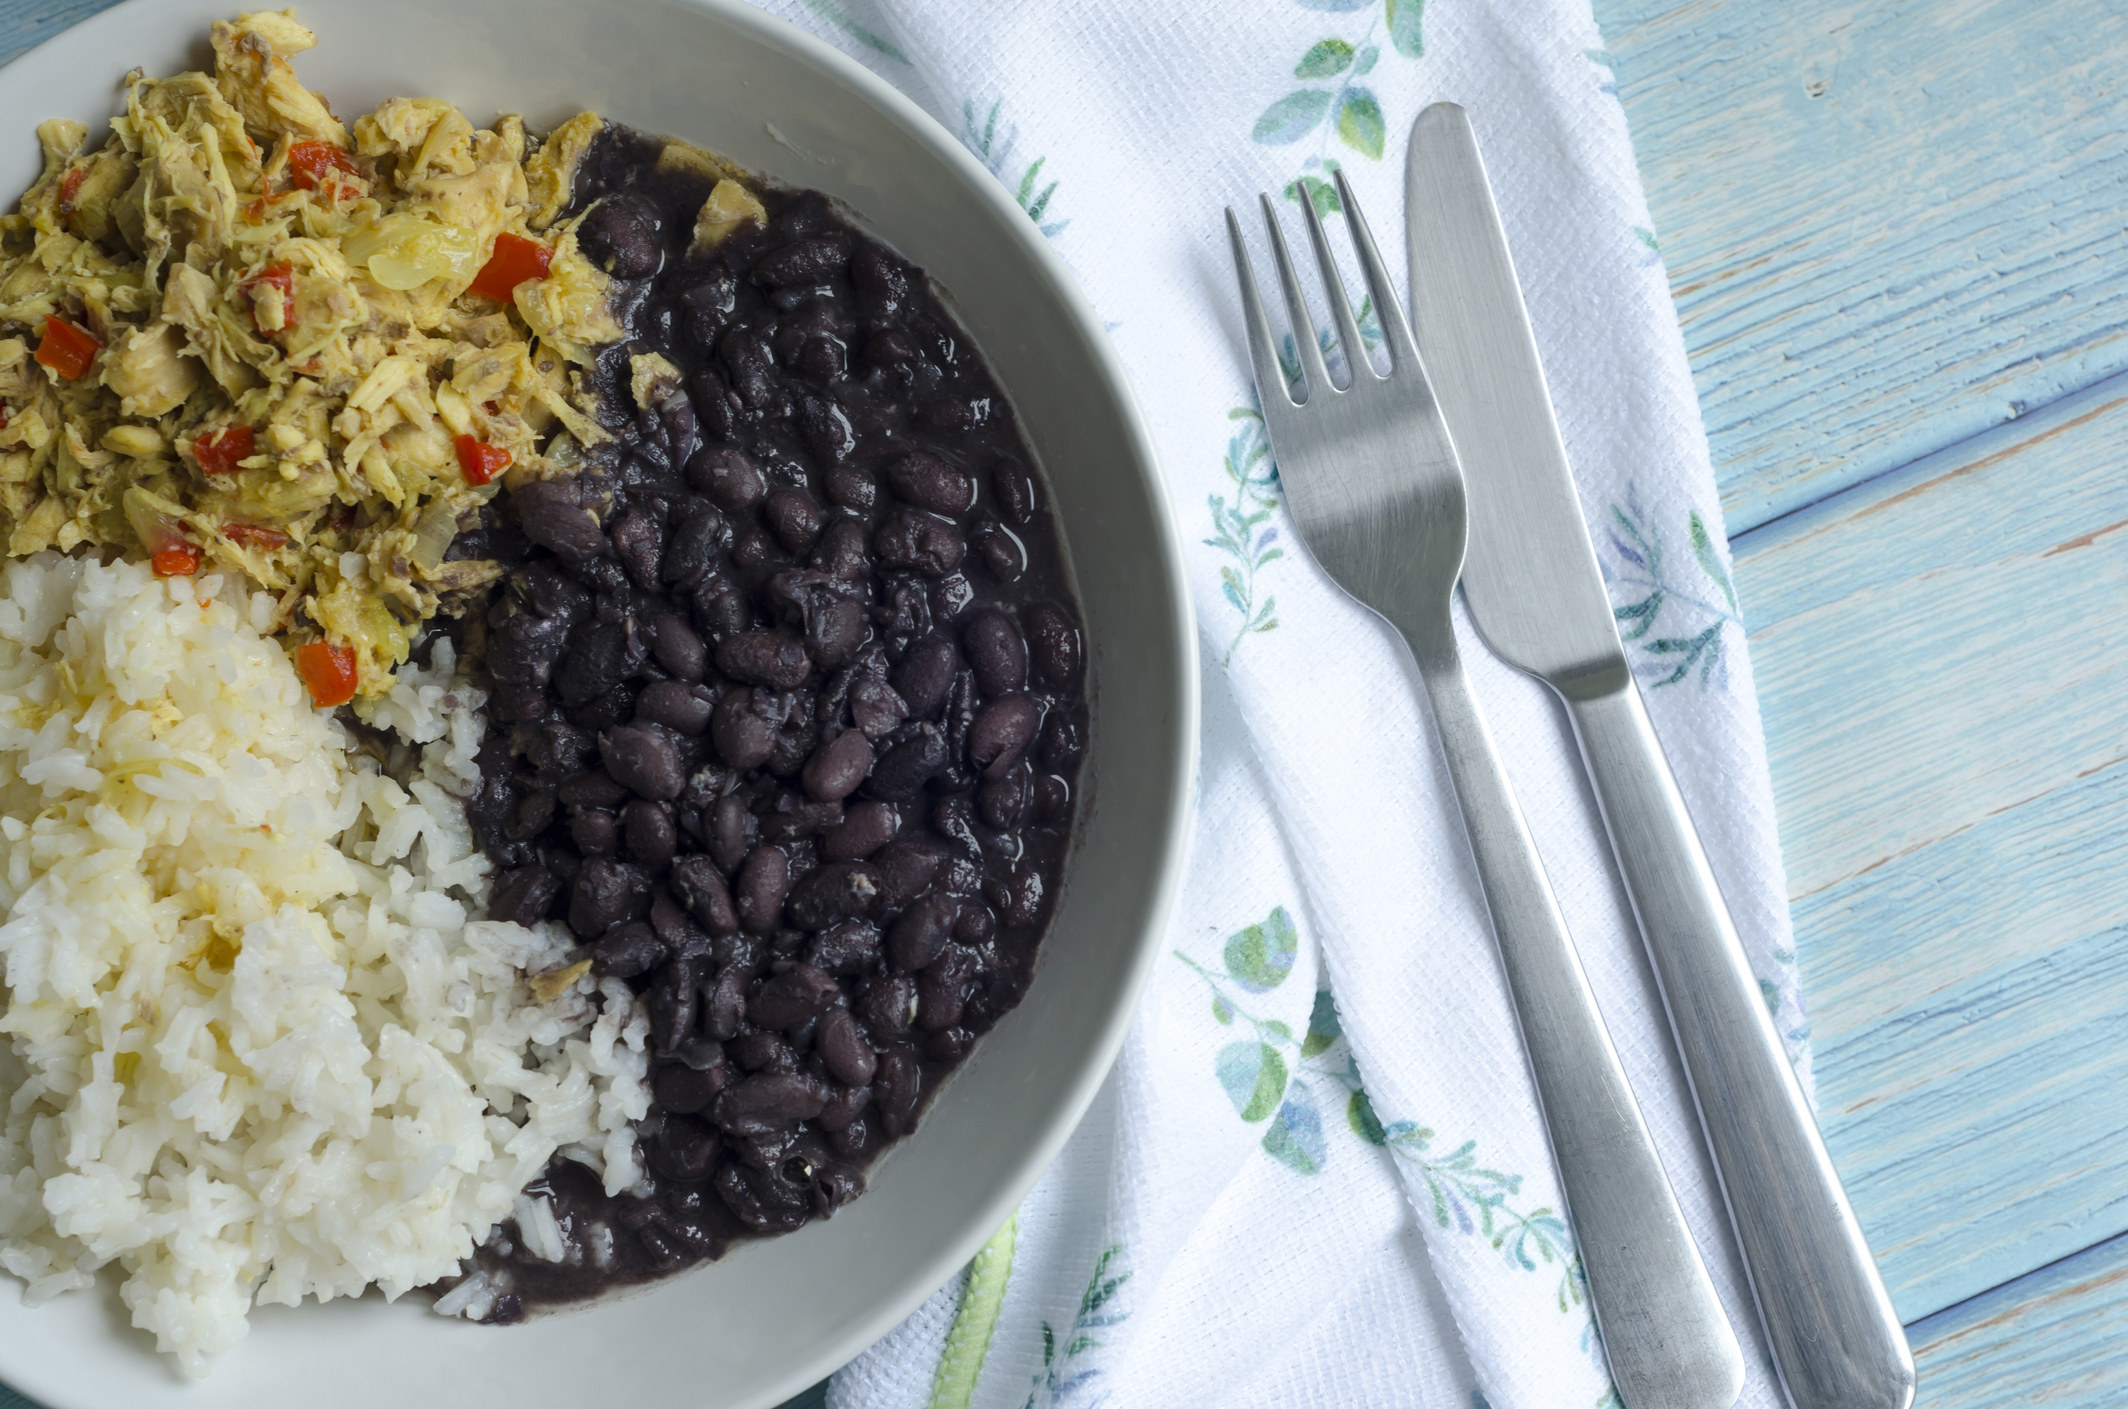 Black beans with rice and shredded chicken.